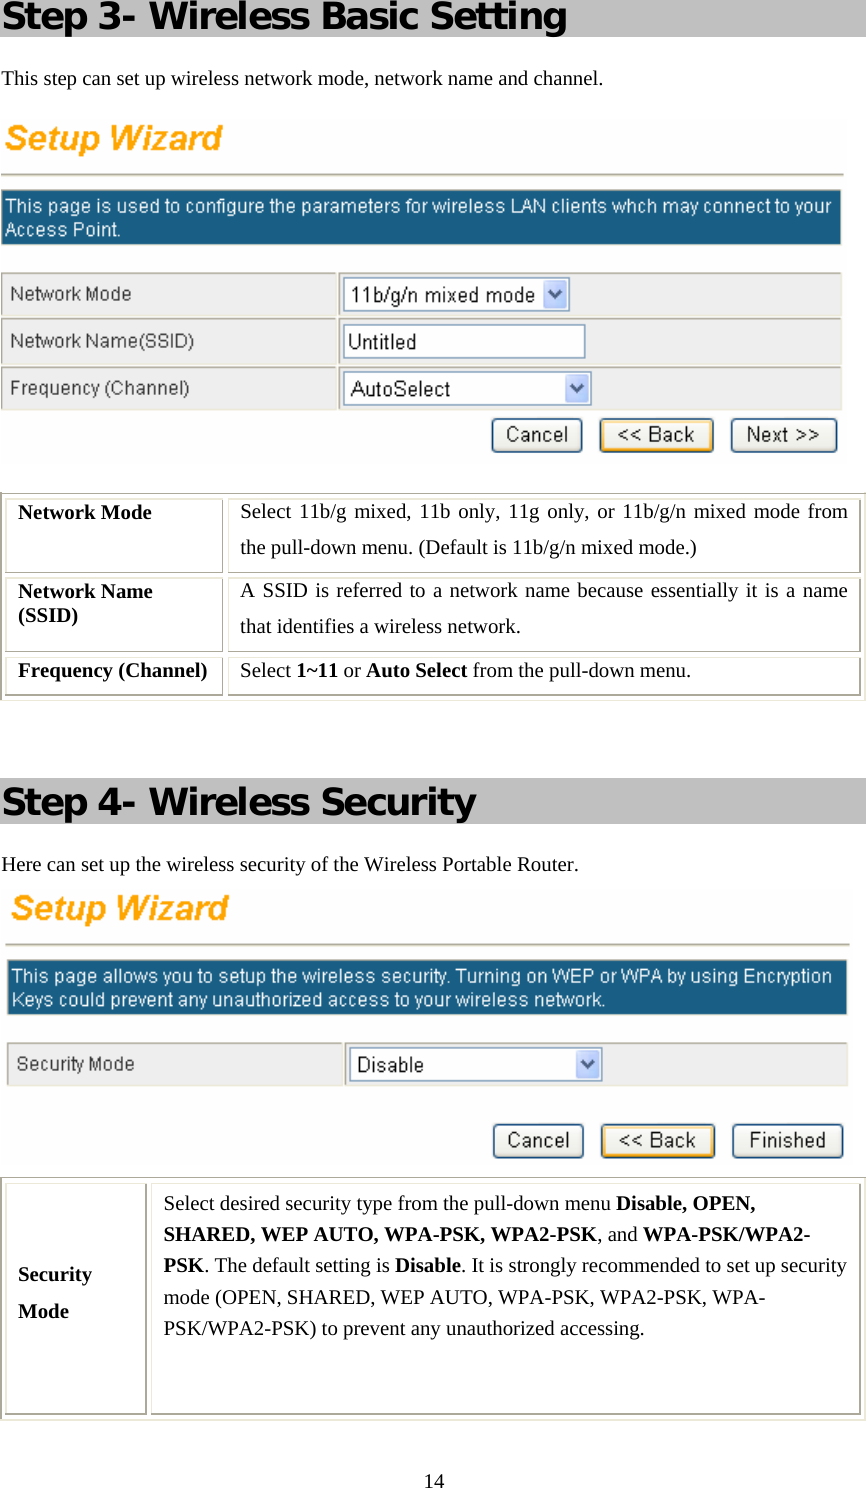   14Step 3- Wireless Basic Setting This step can set up wireless network mode, network name and channel.  Network Mode  Select 11b/g mixed, 11b only, 11g only, or 11b/g/n mixed mode from the pull-down menu. (Default is 11b/g/n mixed mode.) Network Name (SSID)  A SSID is referred to a network name because essentially it is a name that identifies a wireless network.  Frequency (Channel)  Select 1~11 or Auto Select from the pull-down menu.   Step 4- Wireless Security Here can set up the wireless security of the Wireless Portable Router.  Security Mode Select desired security type from the pull-down menu Disable, OPEN, SHARED, WEP AUTO, WPA-PSK, WPA2-PSK, and WPA-PSK/WPA2-PSK. The default setting is Disable. It is strongly recommended to set up security mode (OPEN, SHARED, WEP AUTO, WPA-PSK, WPA2-PSK, WPA-PSK/WPA2-PSK) to prevent any unauthorized accessing.  